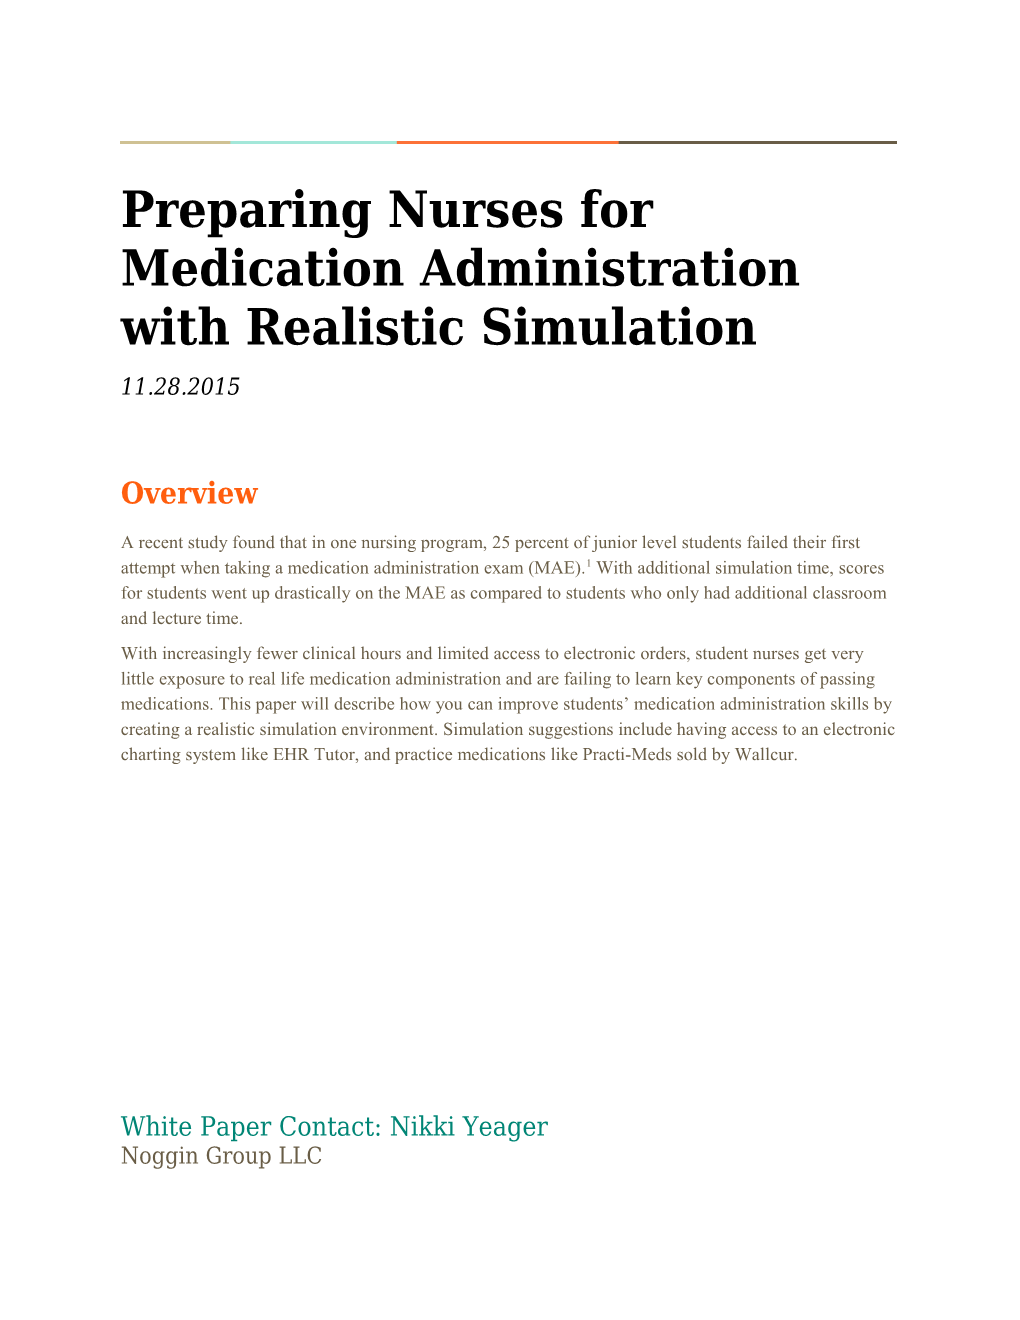 Preparing Nurses for Medication Administration with Realistic Simulation